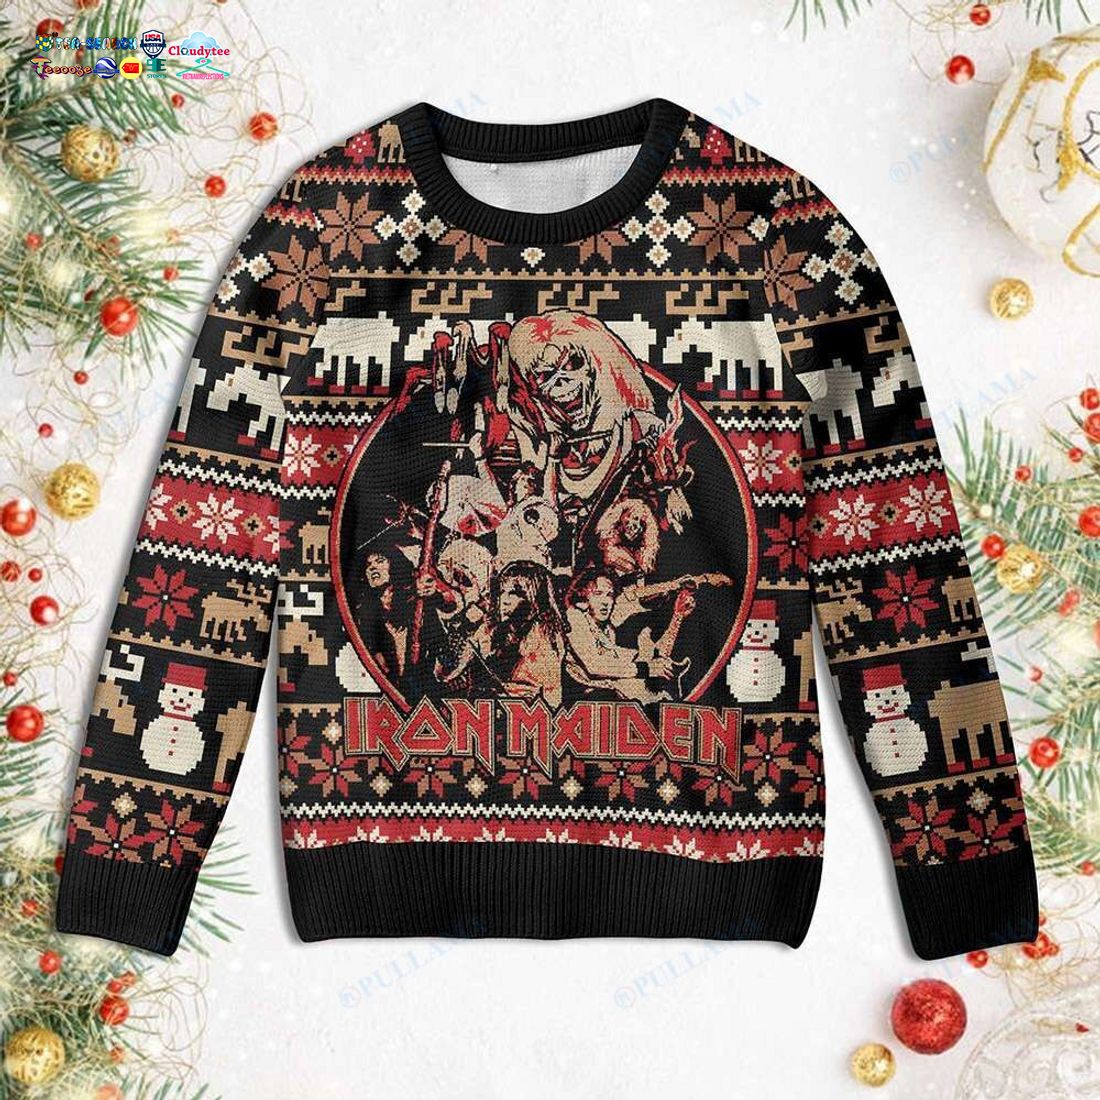 Pullama Iron Maiden Ver 2 Ugly Christmas Sweater - You look handsome bro